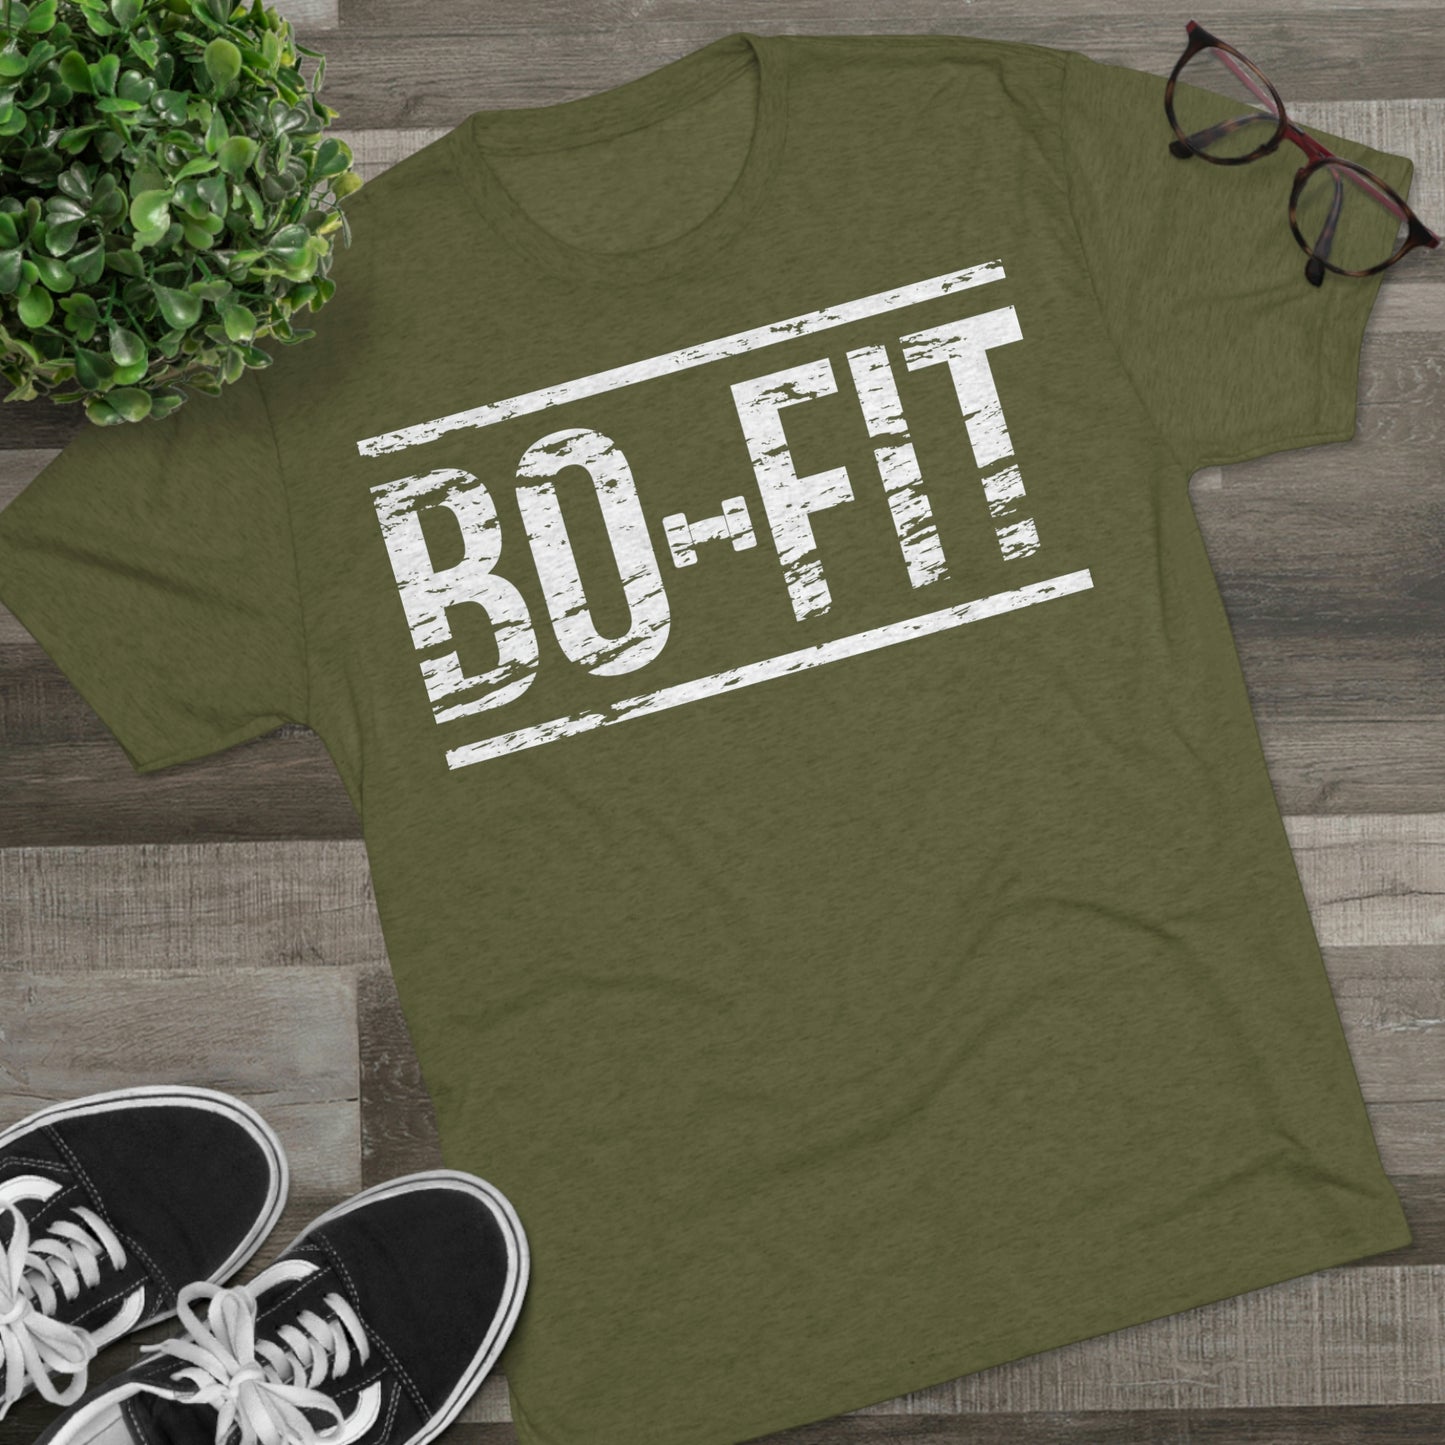 Army Shirt by Bo-Fit | Extra Soft!